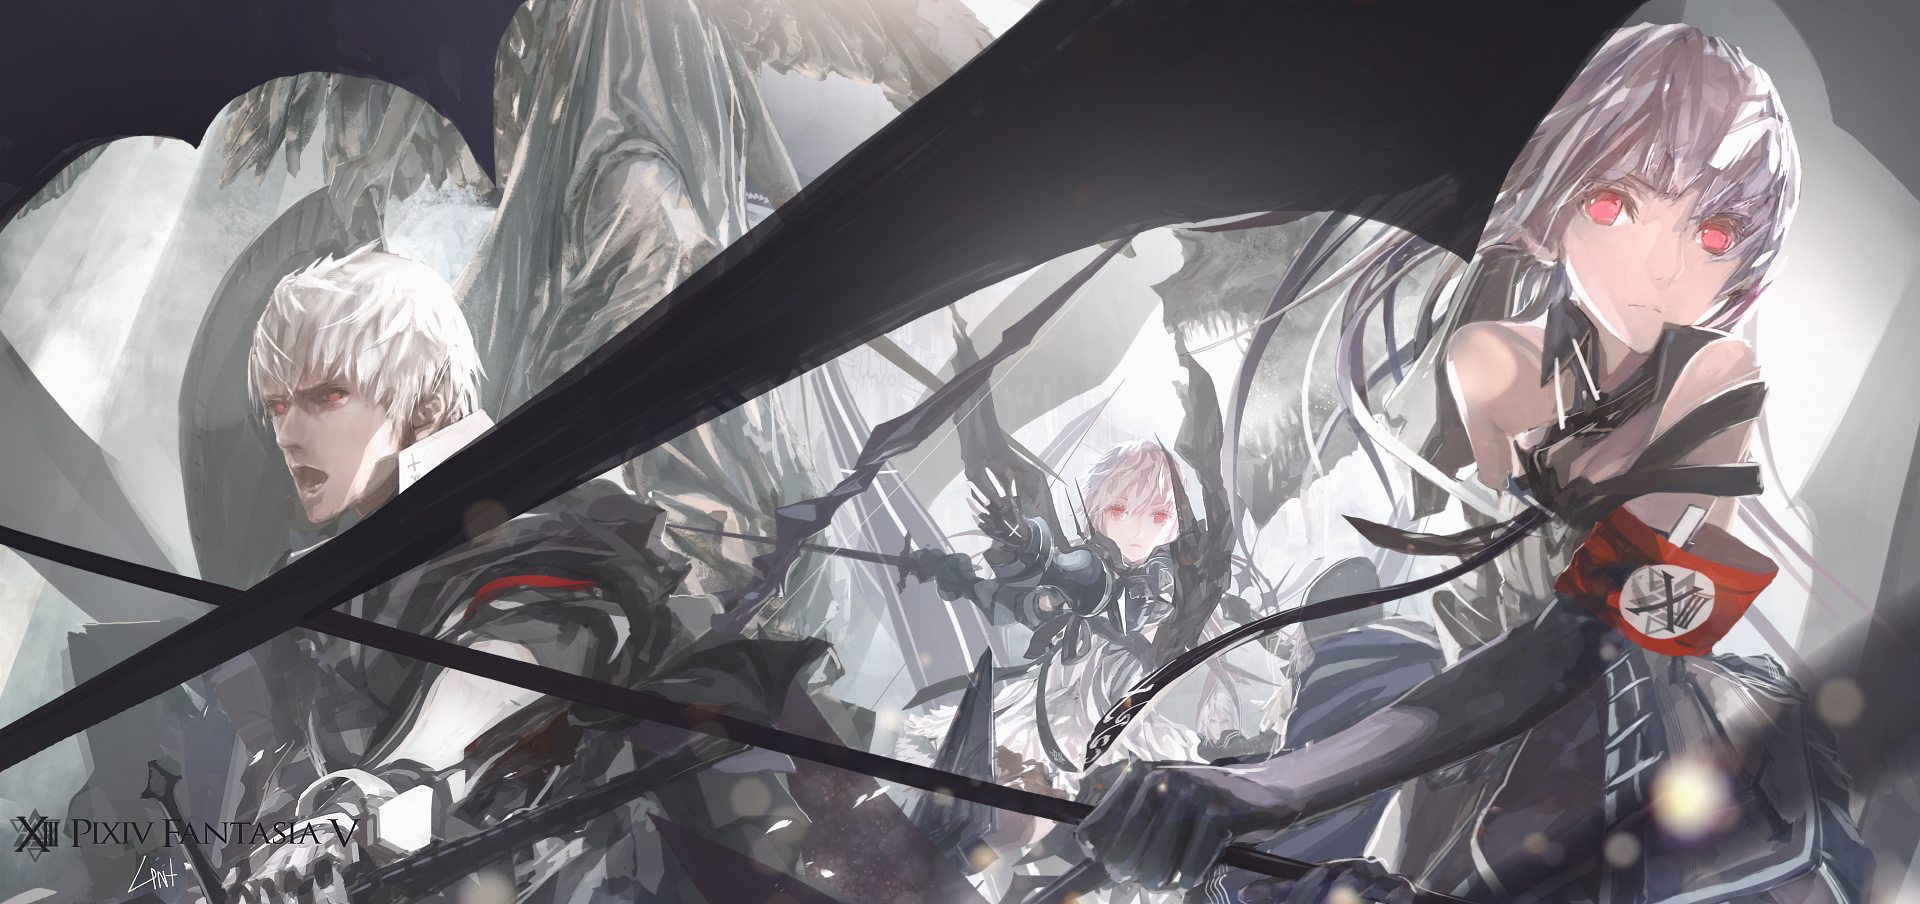 Pixiv Fantasia V Wallpaper and Background Image | 1920x904 | ID:112180